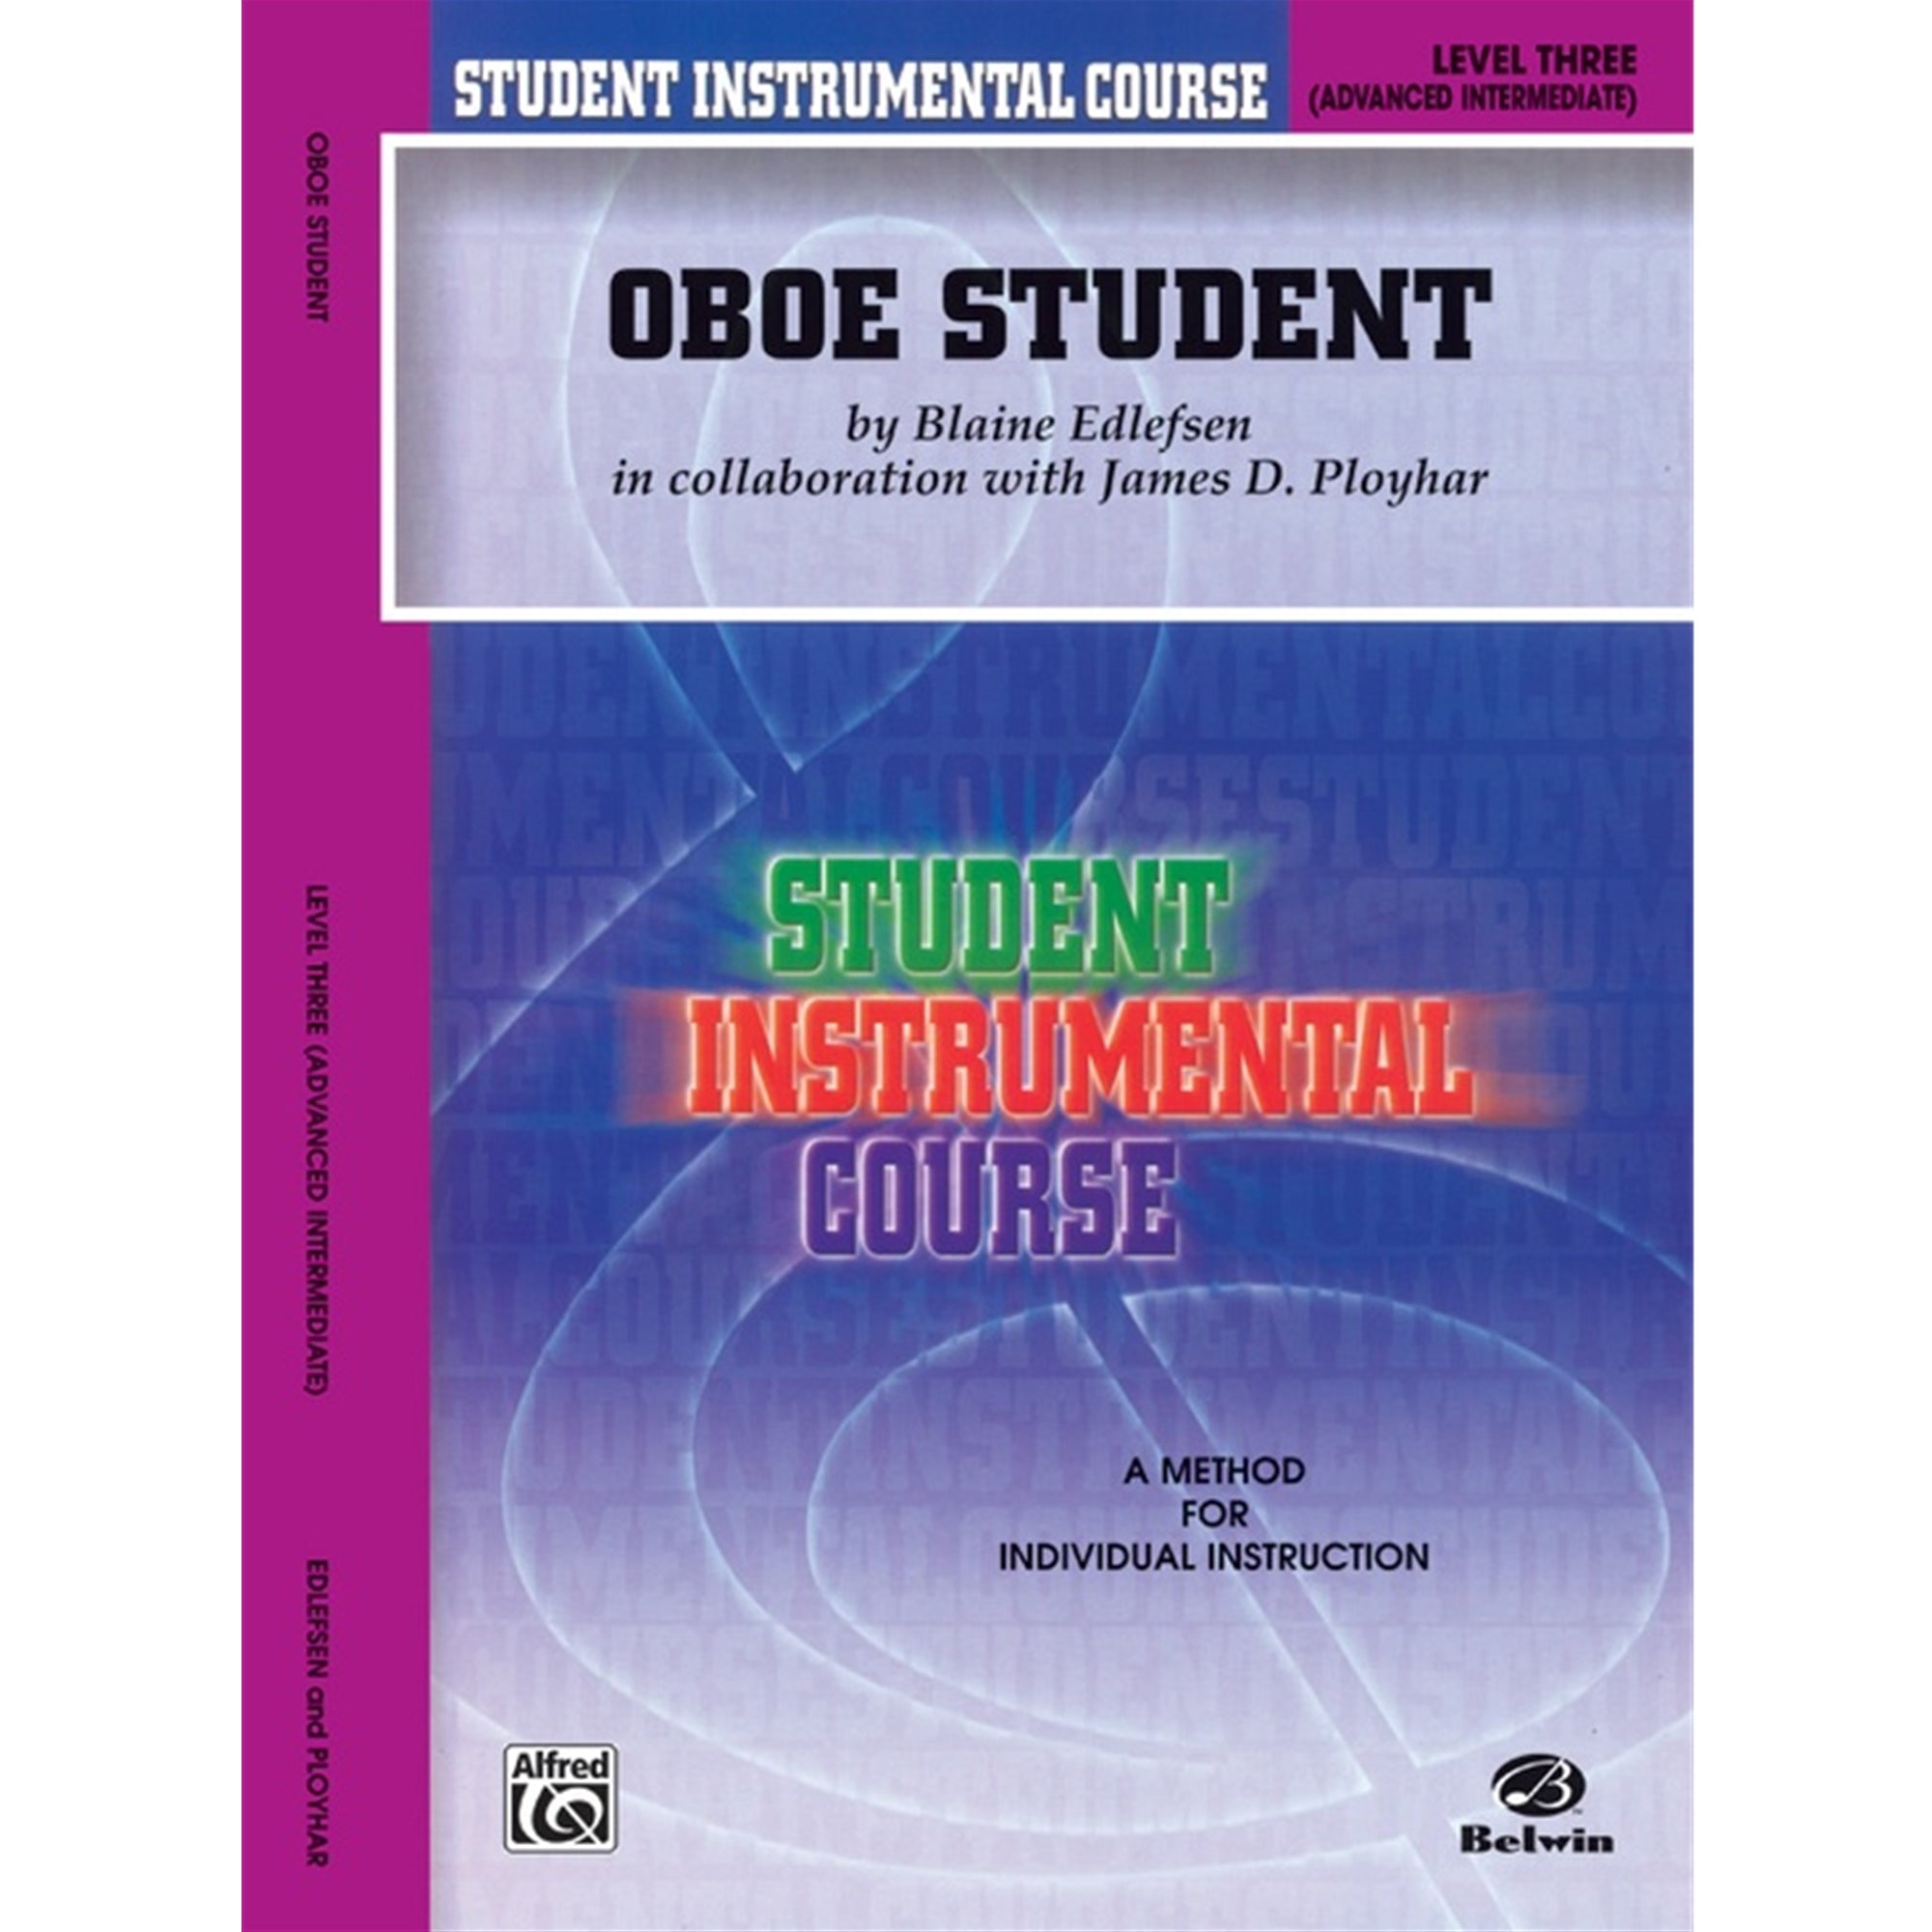 ALFRED 00BIC00321A Student Instrumental Course: Oboe Student, Level III [Oboe]